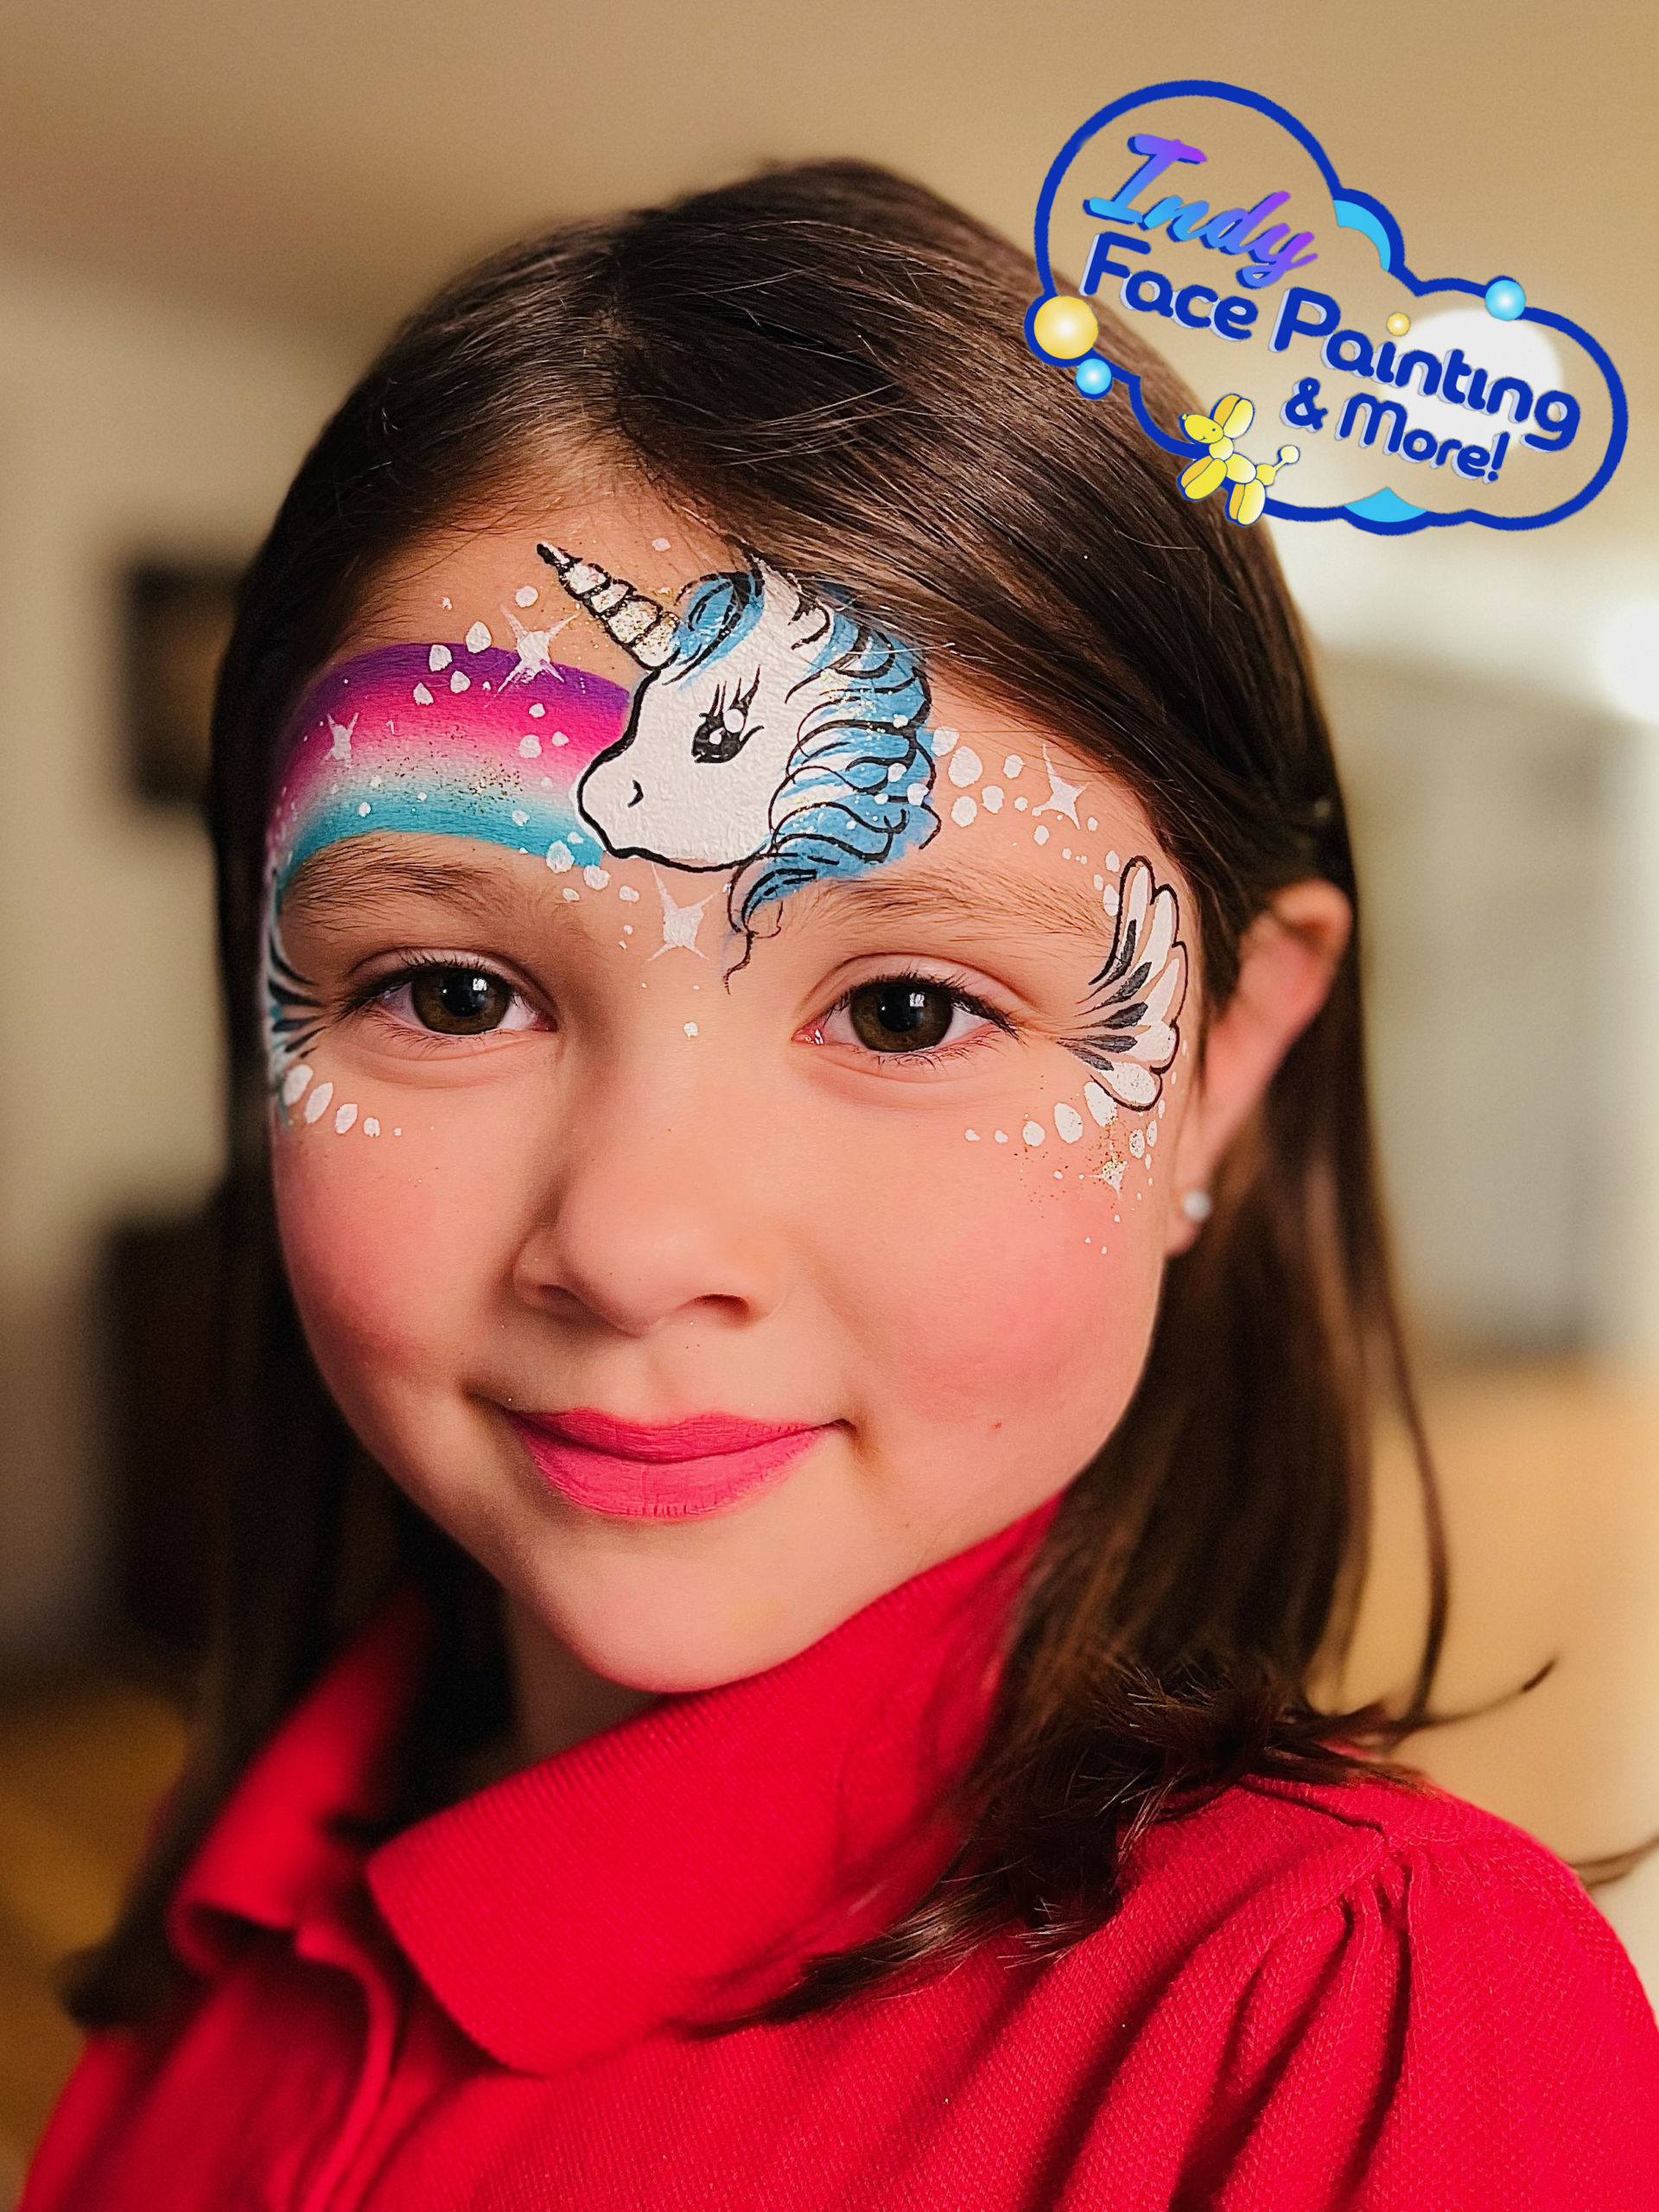 Indy Face Painting unicorn